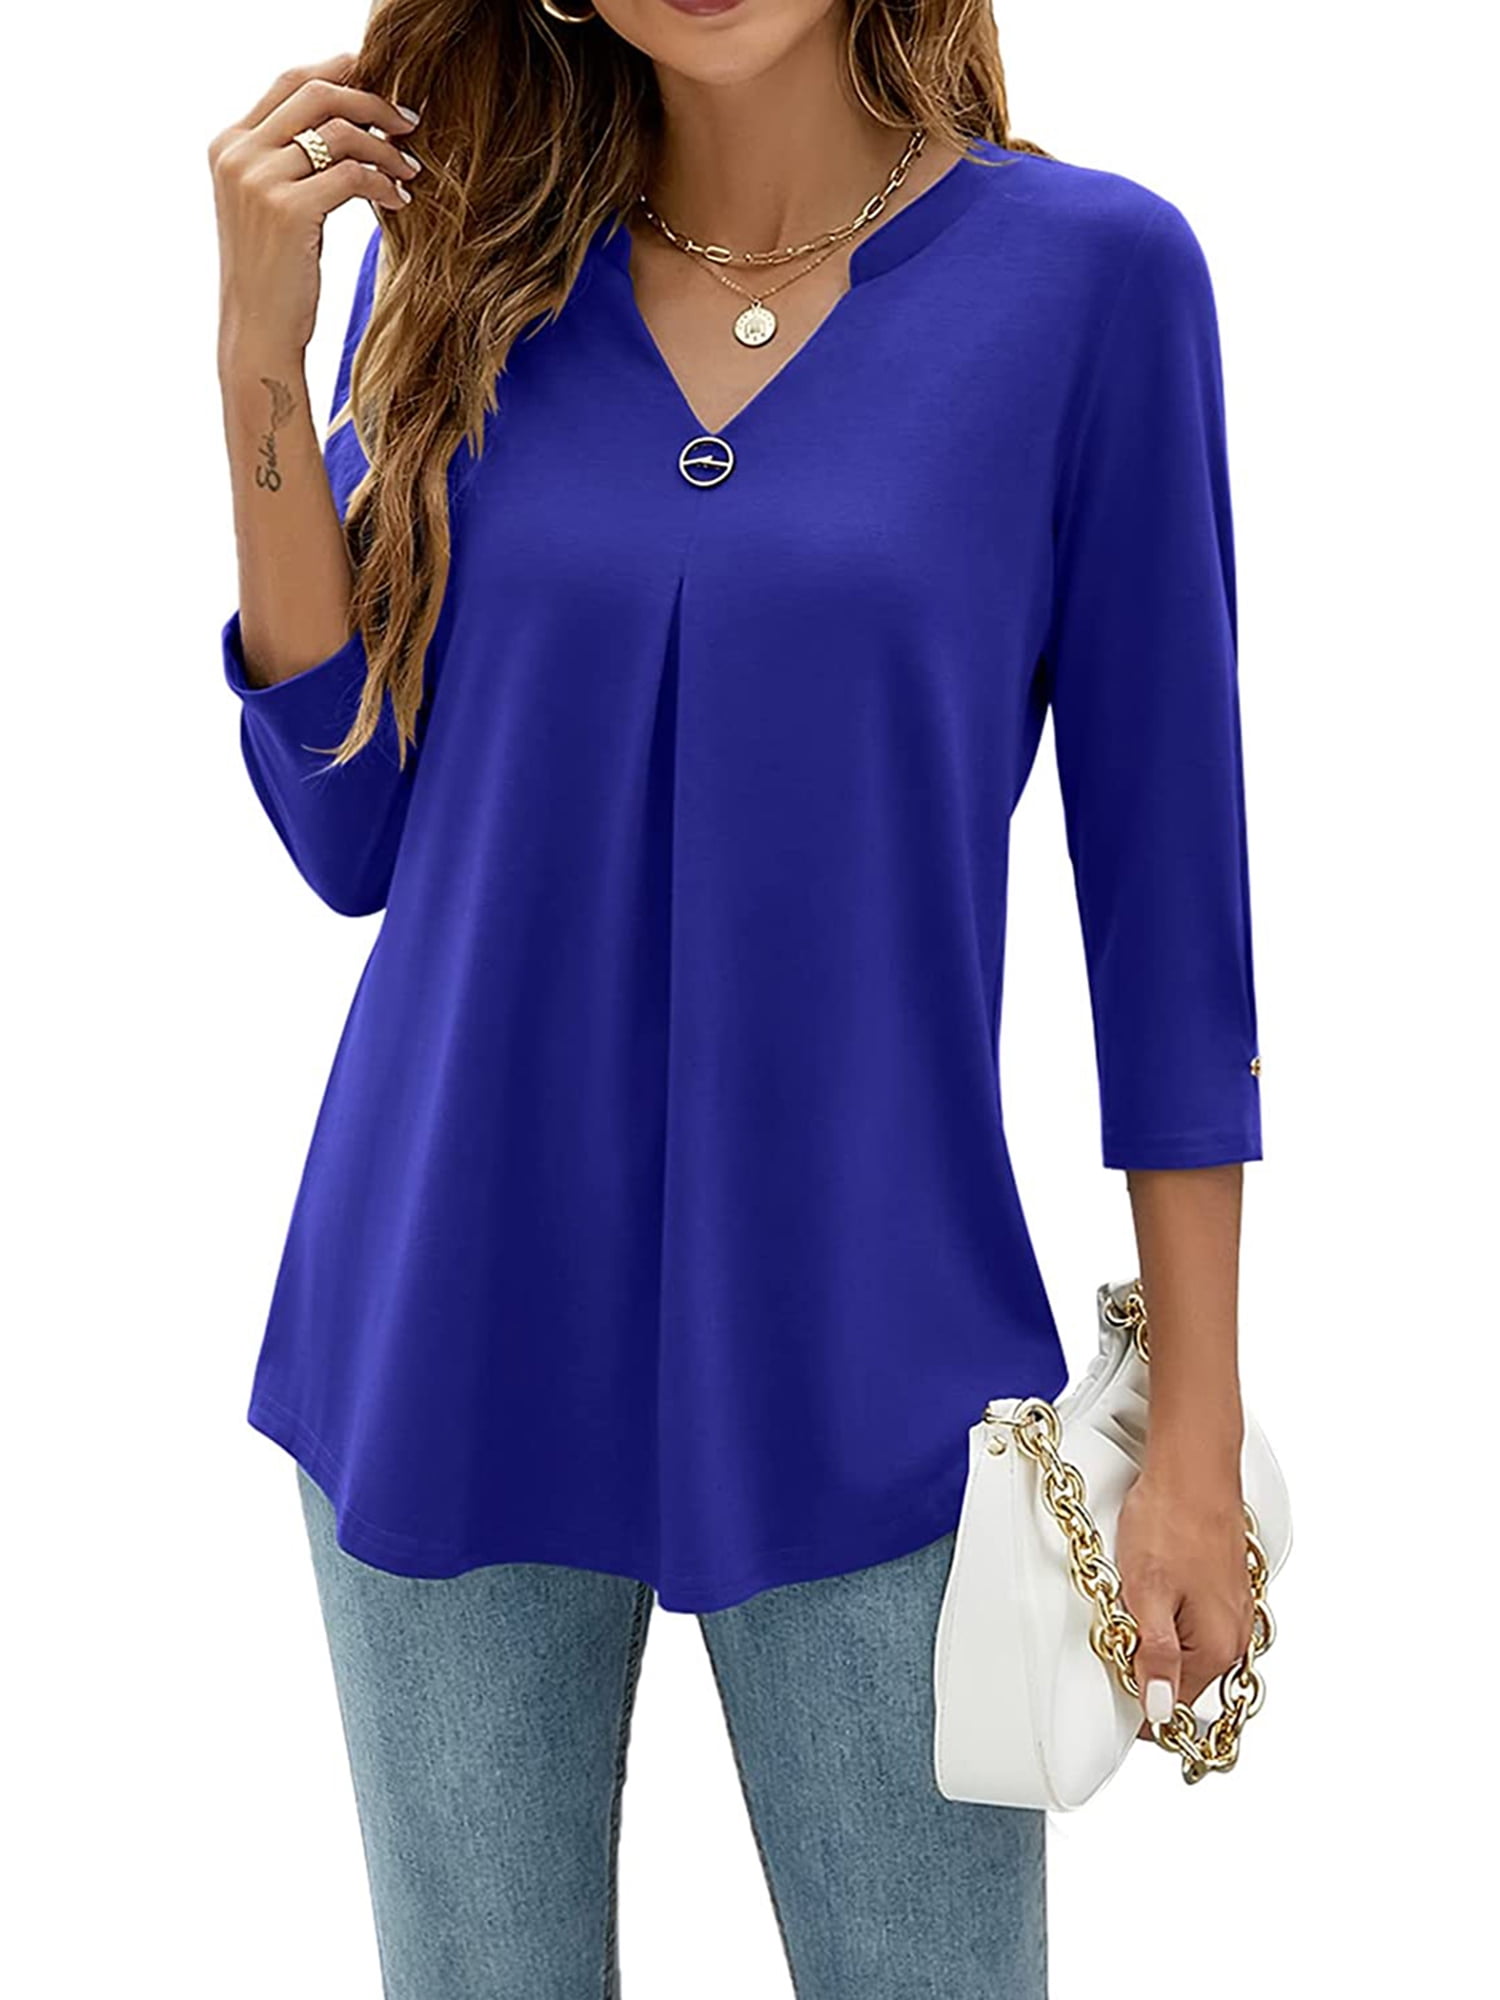 ESASSALY Women 3/4 Sleeve V-Neck Blouses Button-down ShirtsTops Spring ...